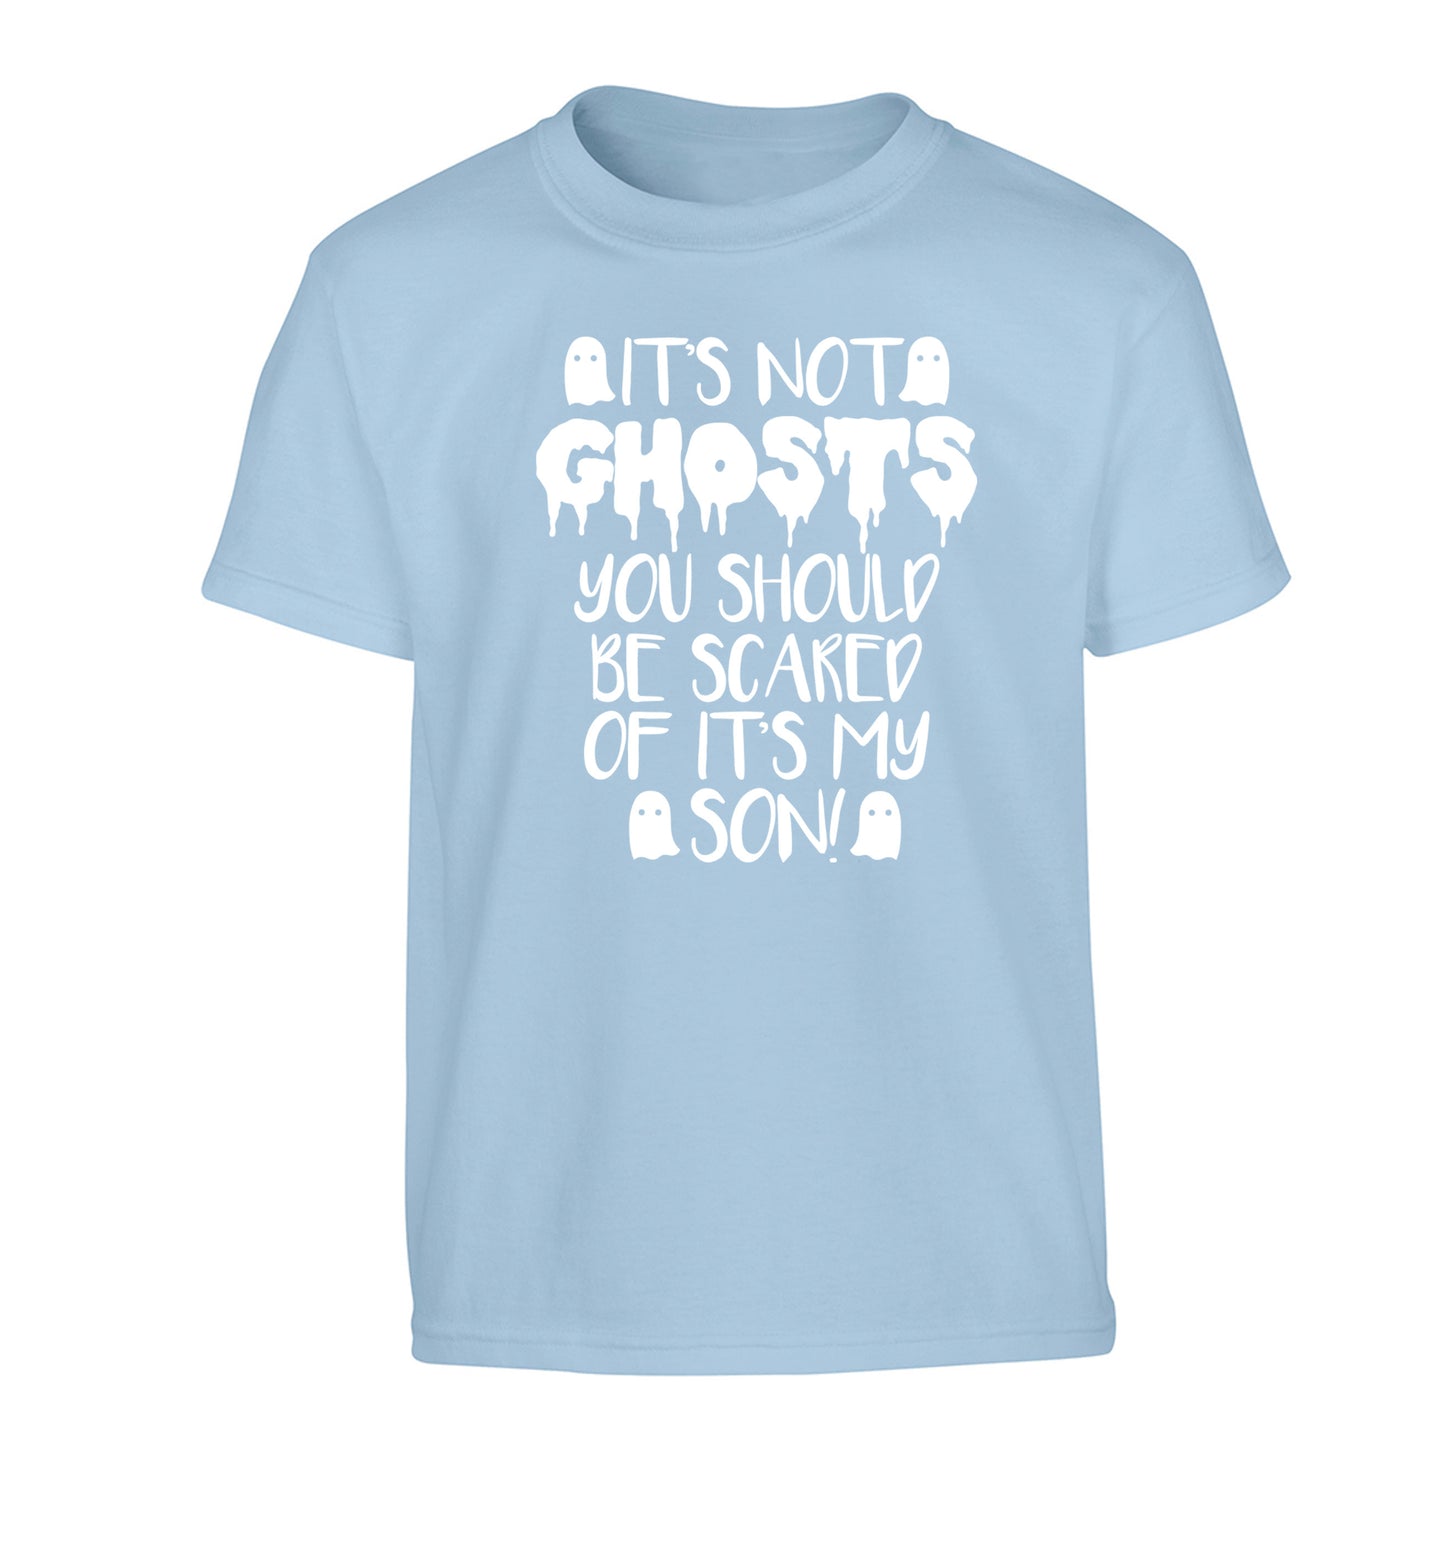 It's not ghosts you should be scared of it's my son! Children's light blue Tshirt 12-14 Years